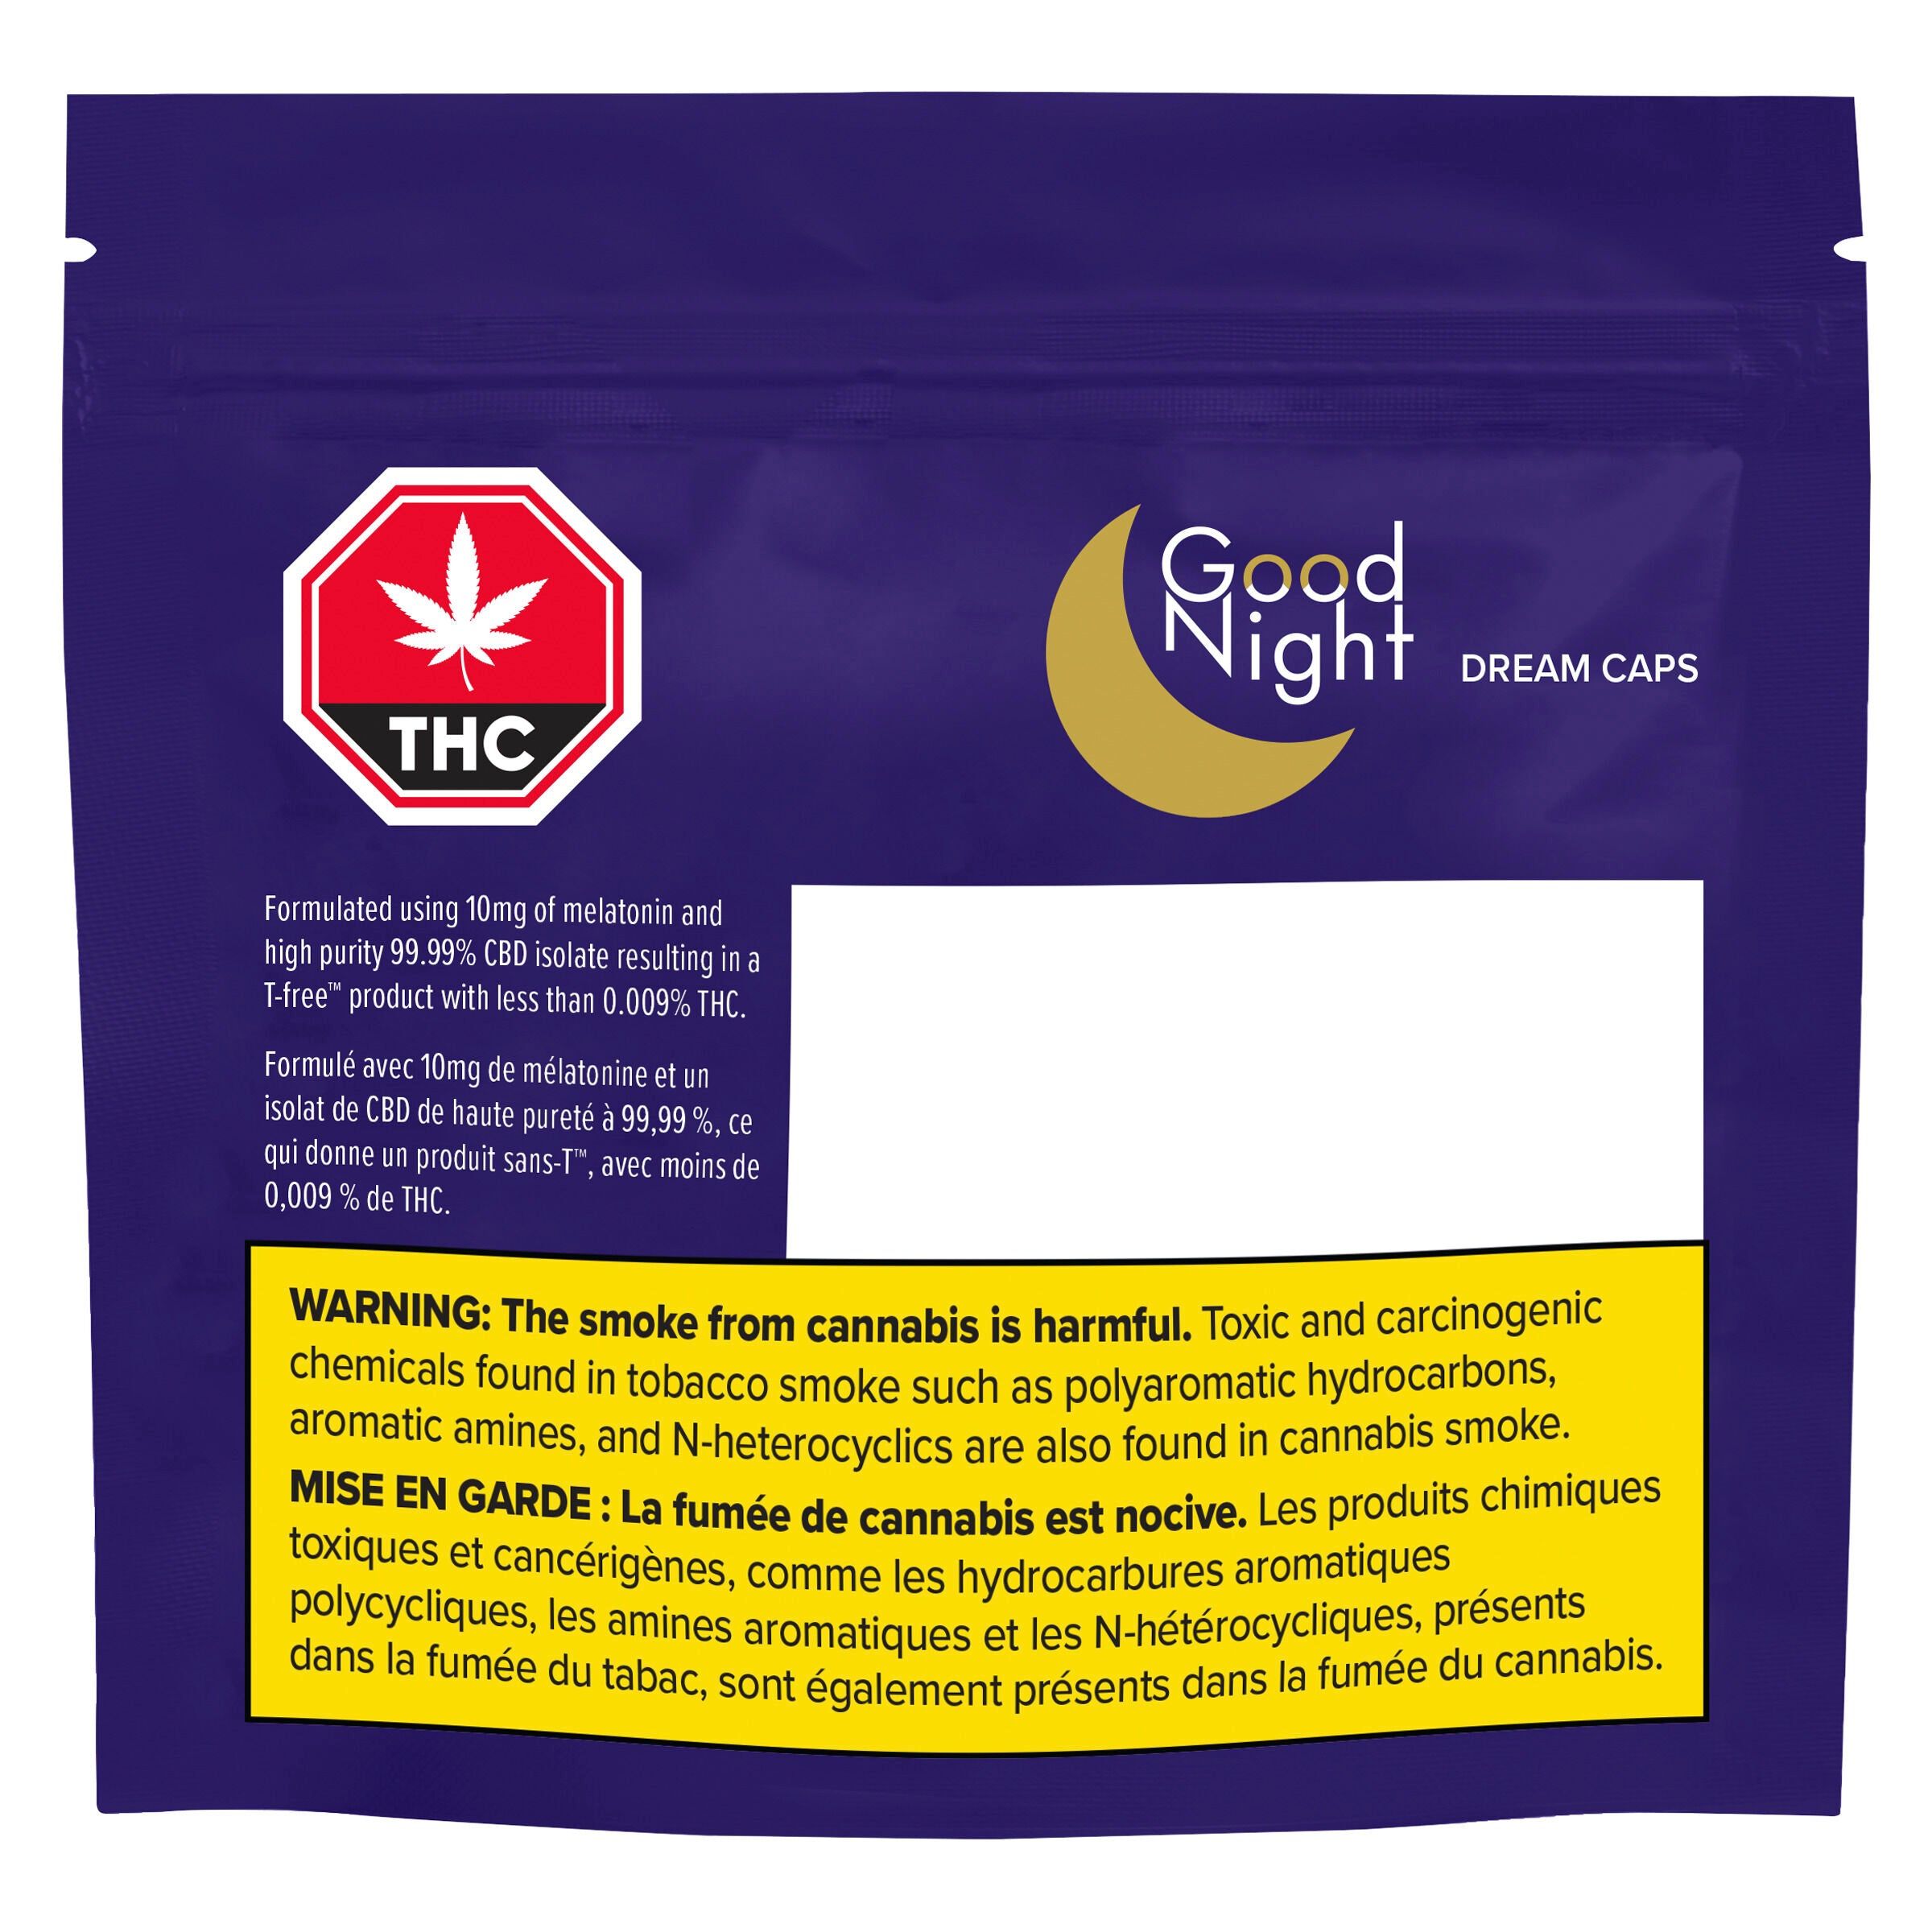 Cannabis Product GoodNight Dream Caps by Goodnight - 2